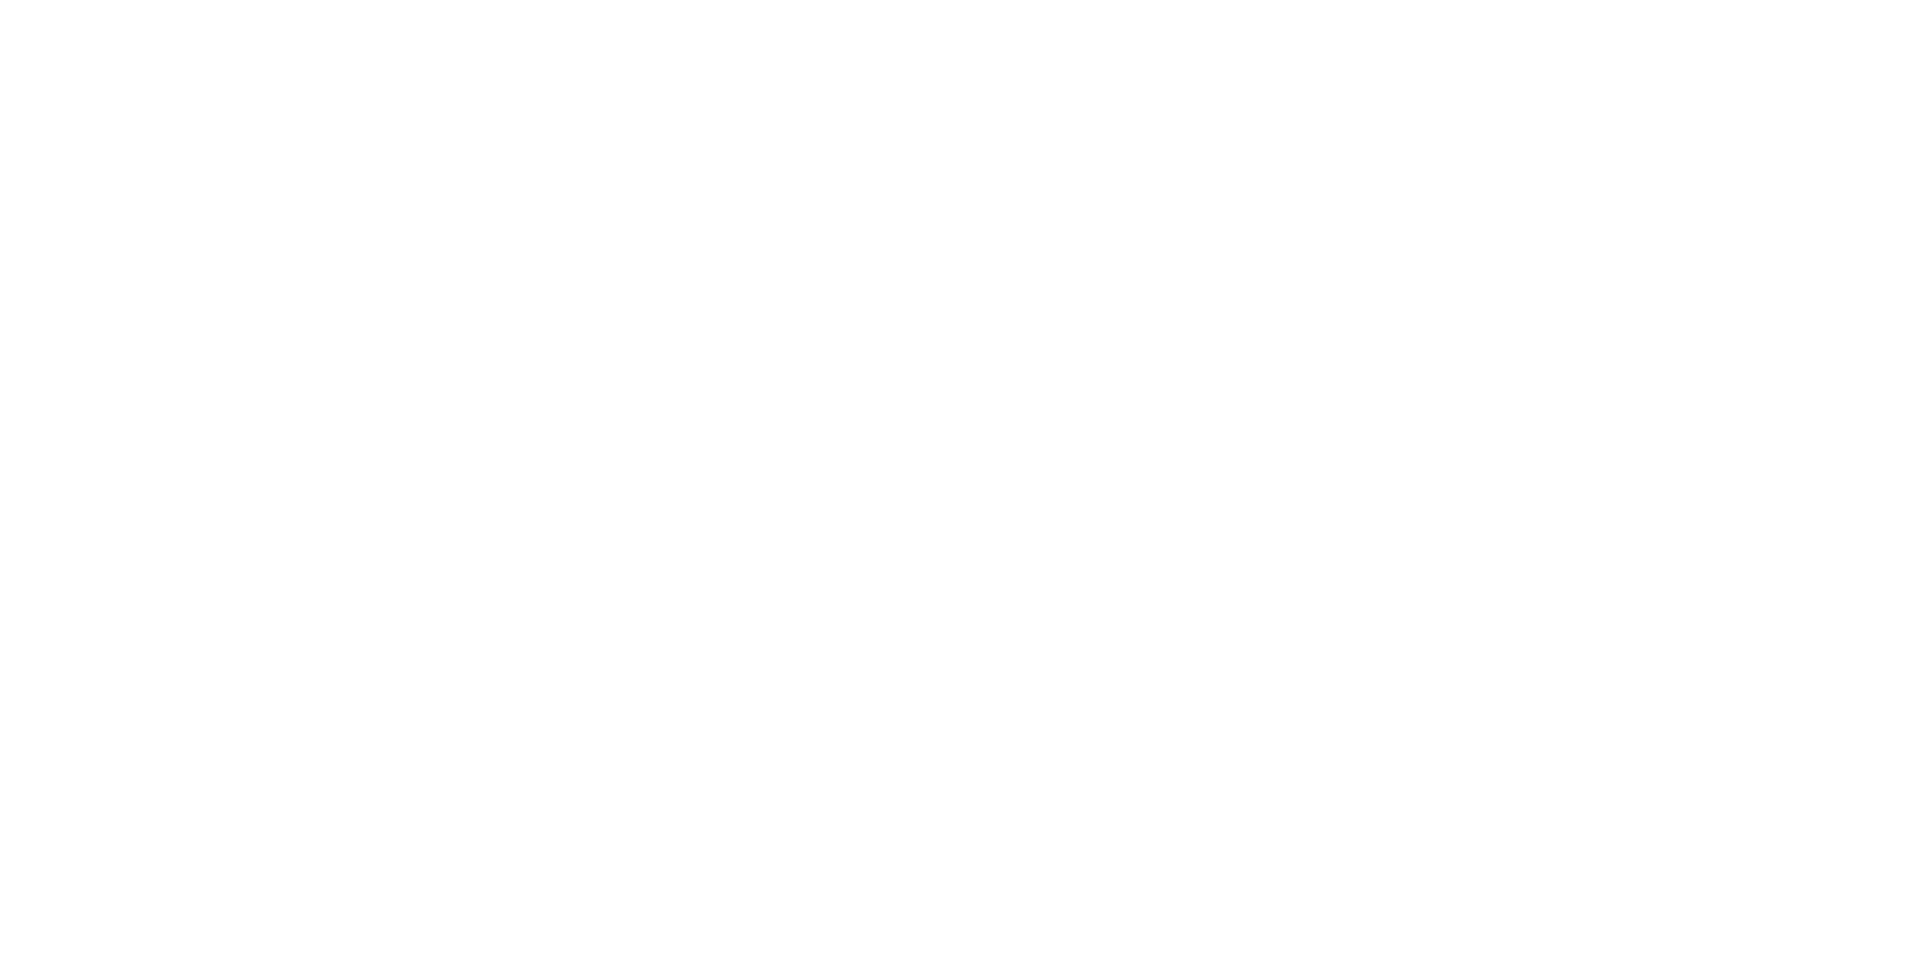 Interactive web banner encouraging visitors to 'Choose Your Style' with an arrow icon pointing right. It invites users to select the category that best represents their company or brand, guiding them towards personalized apparel selections.